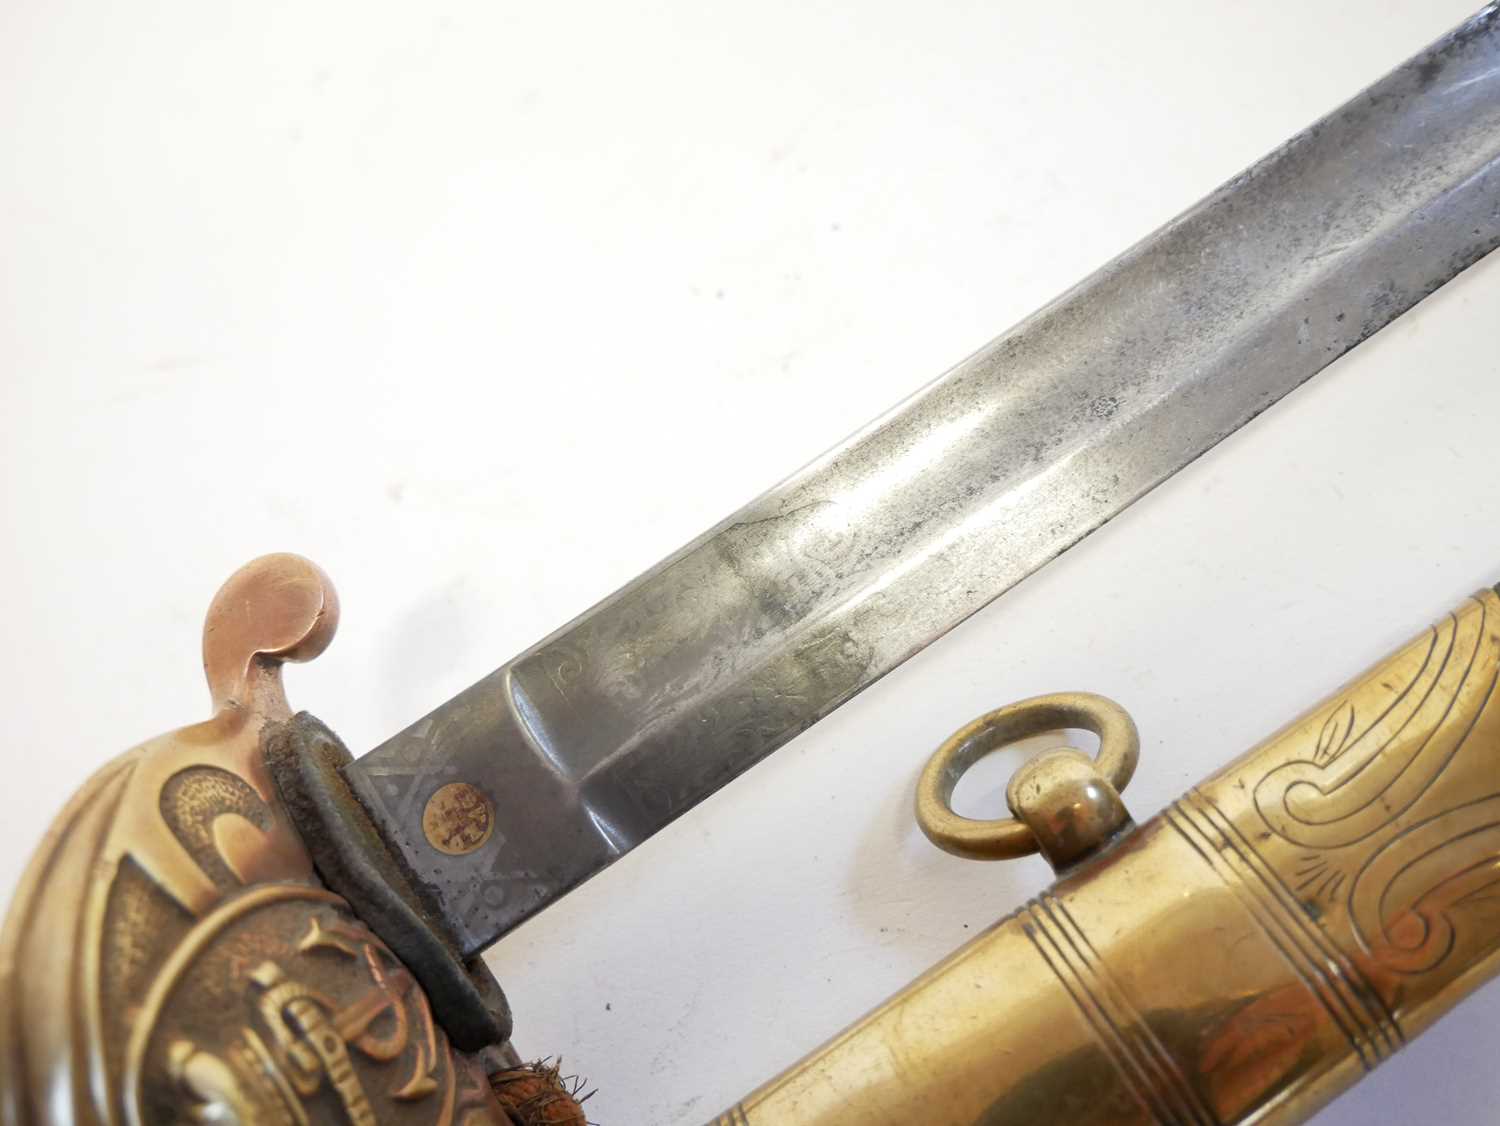 Royal Navy Petty Officer's sword, similar to an 1827 Naval sword but without the lion head pommel, - Image 6 of 16